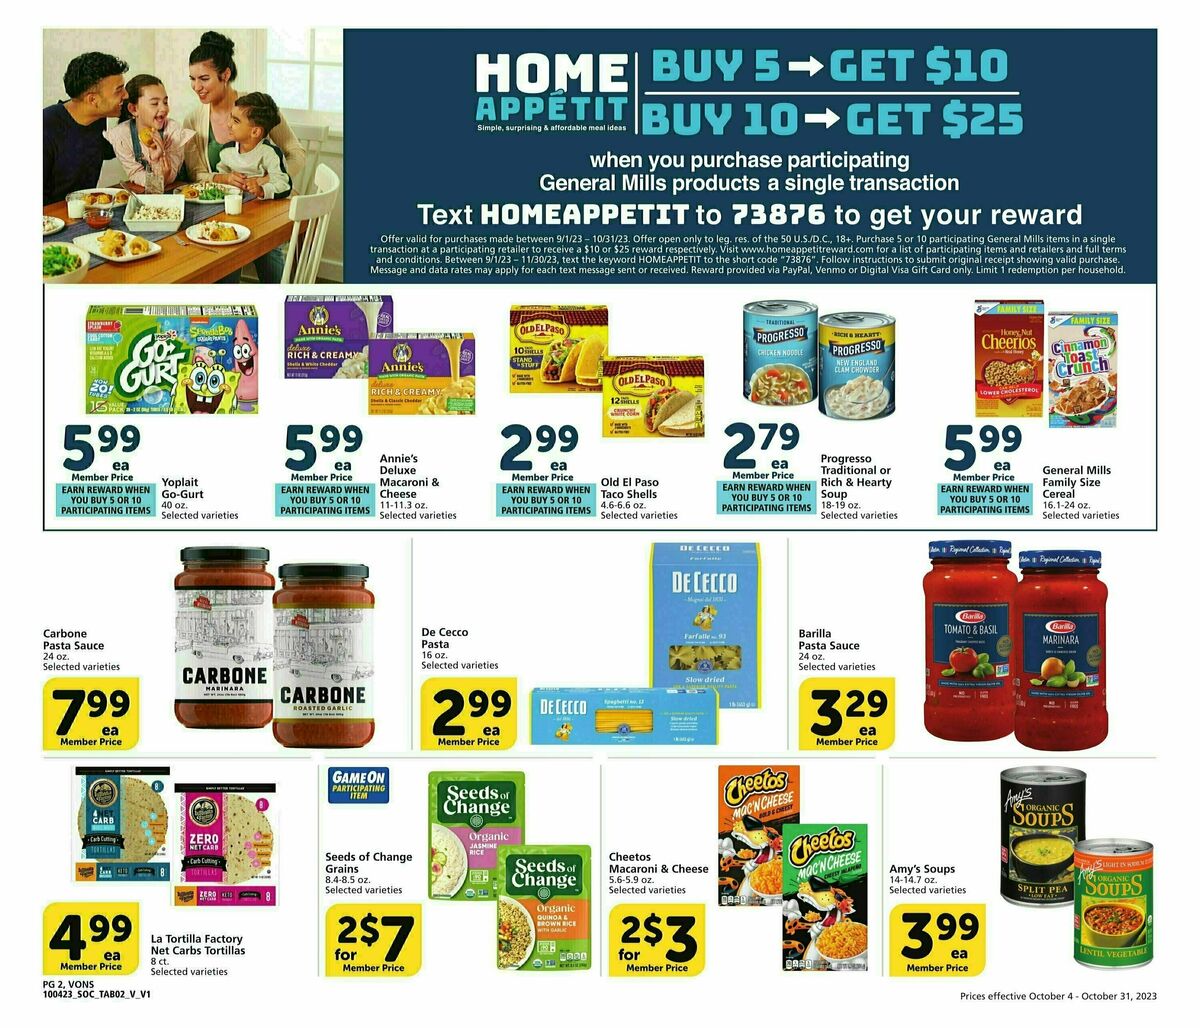 Vons Big Book of Savings Weekly Ad from October 4